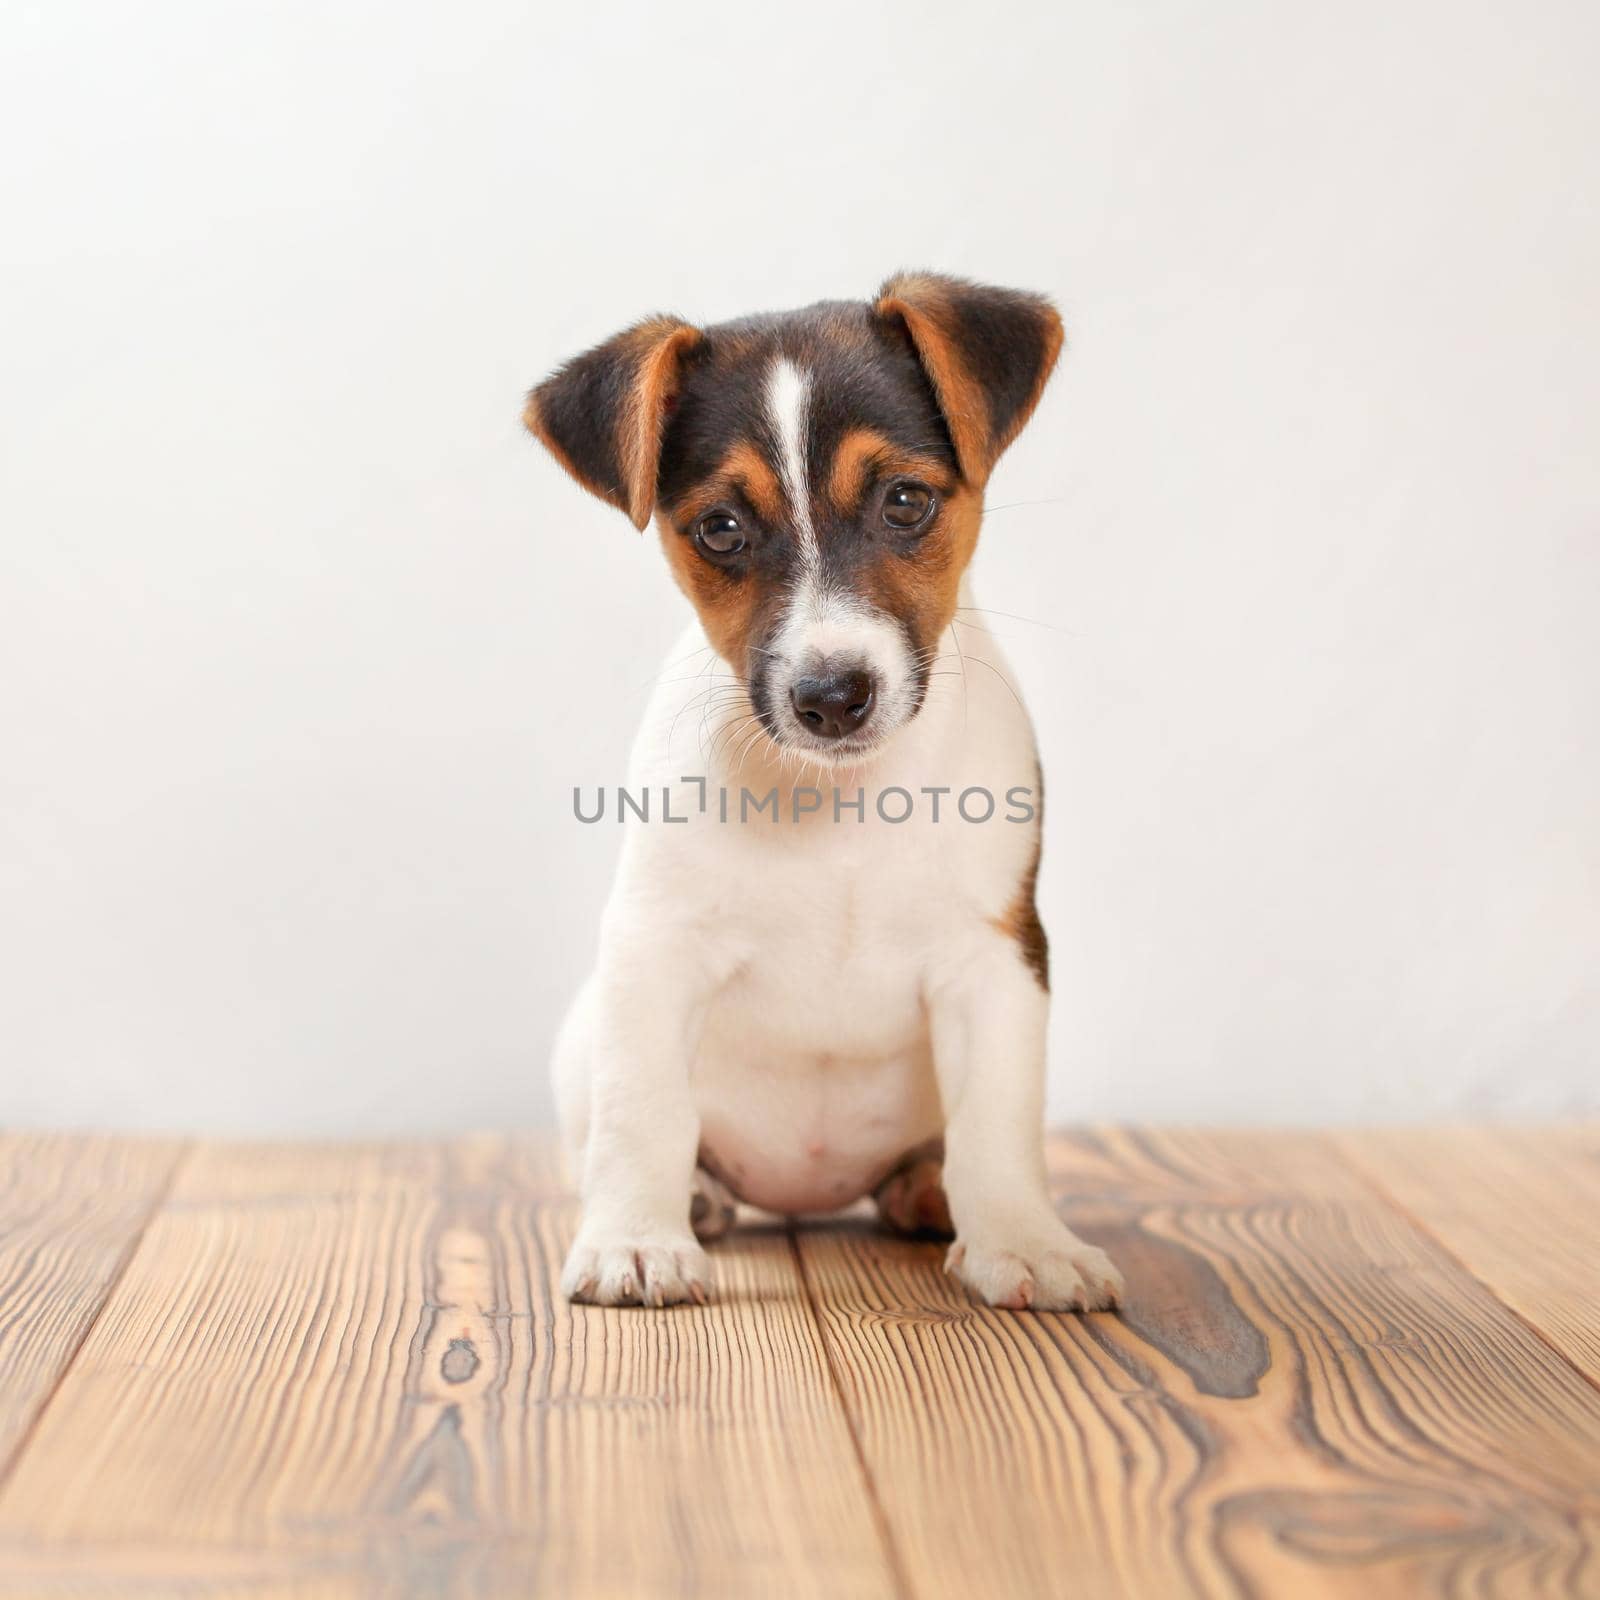 Three months old Jack Russell terrier puppy standing on wooden boards, white background, studio shot.